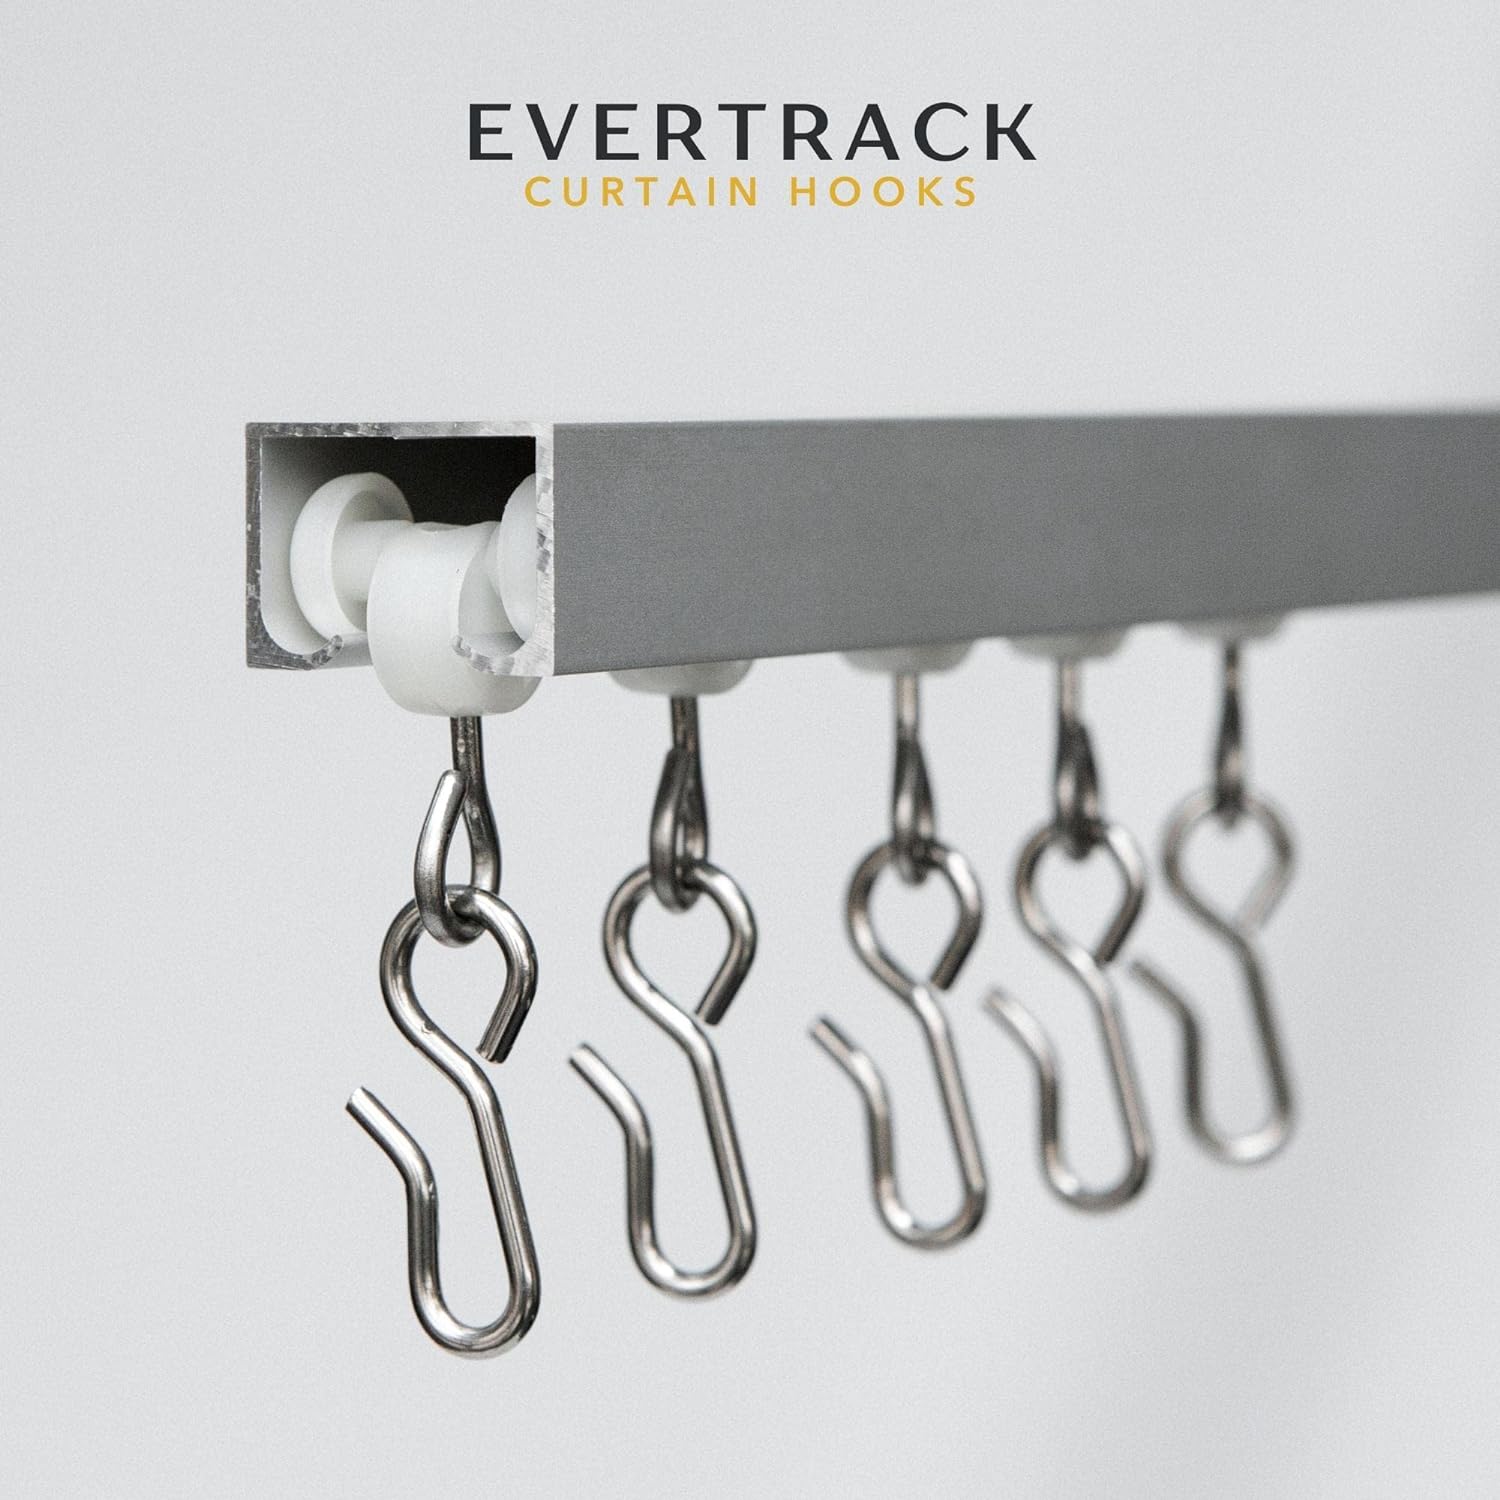 EverTrack Curtain Hooks - Roller Carriers for Ceiling Mounted Curtain Track with Hooks for Curtains, Drapes, and Room Dividers - Pack of